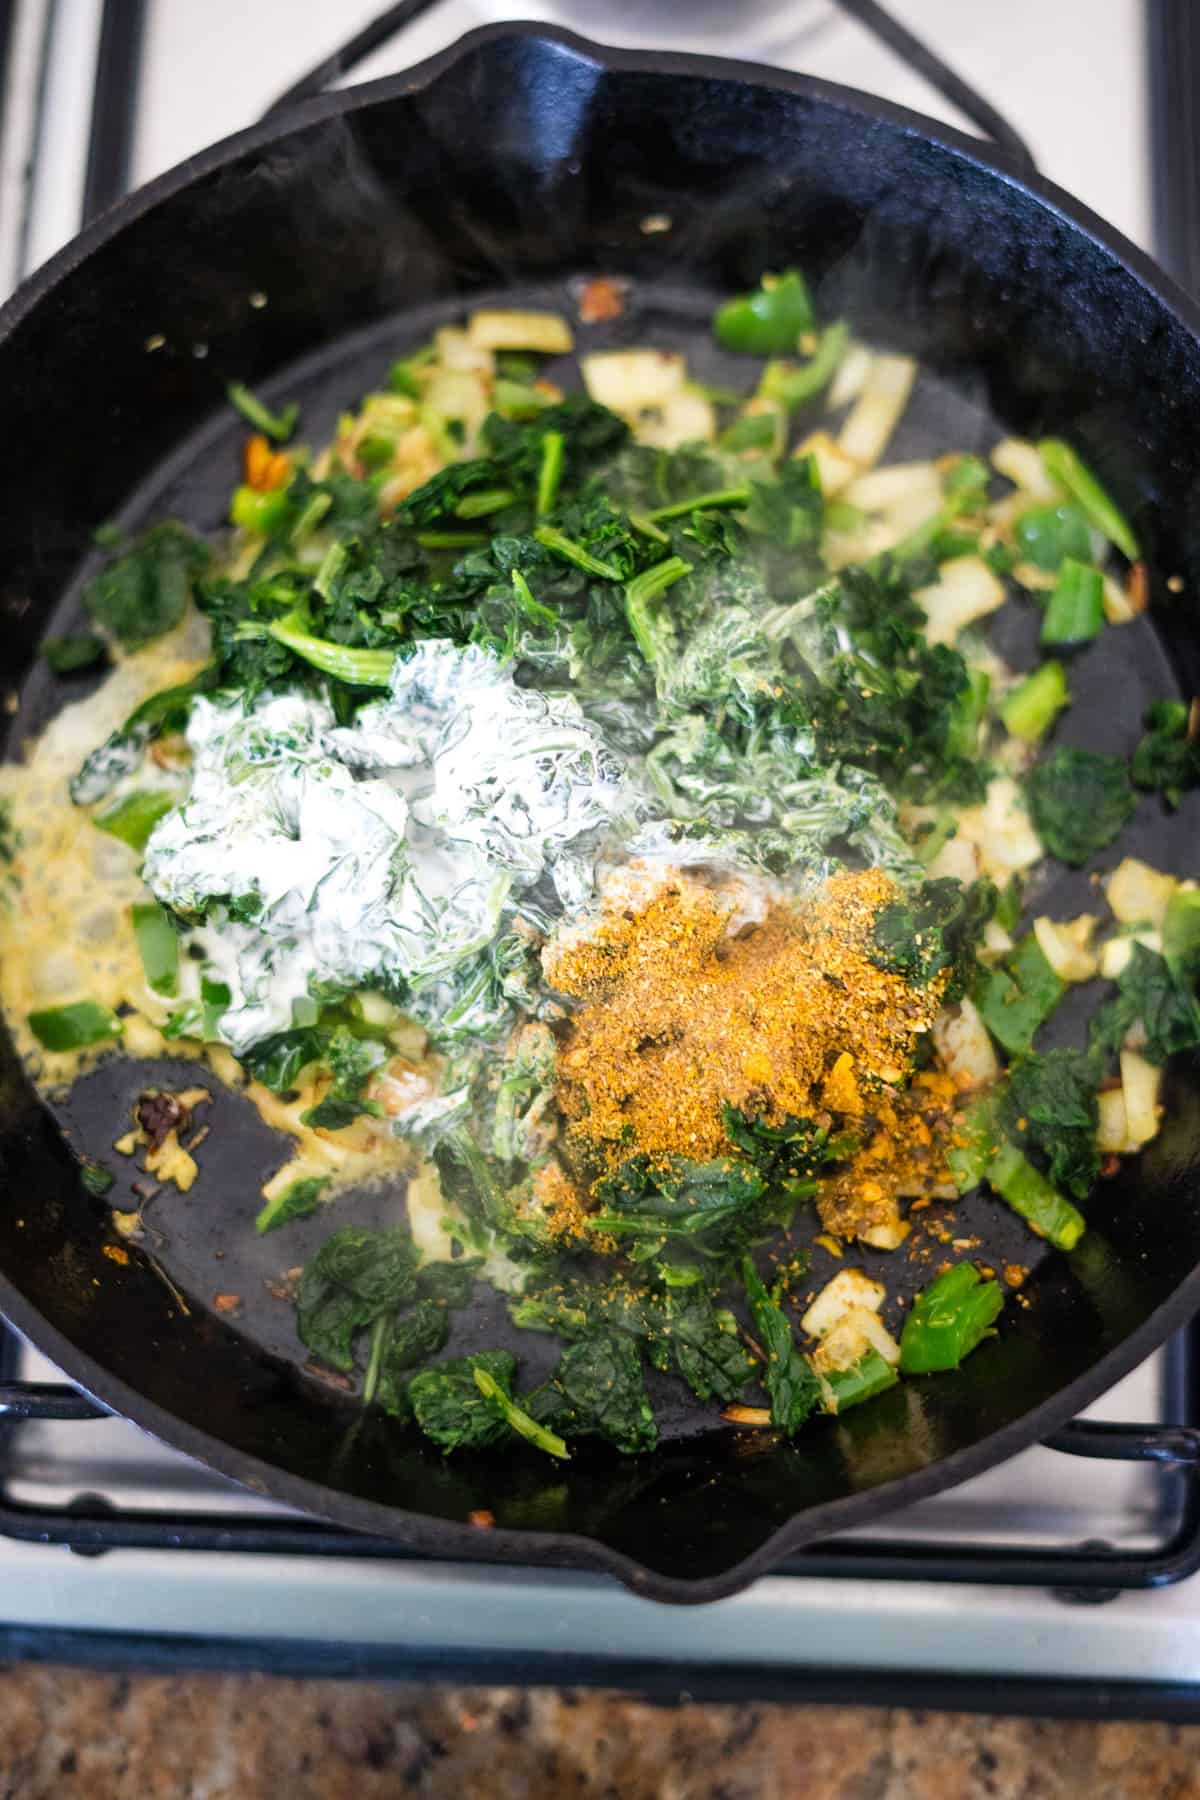 Cooking palak with spices and halloumi in a cast iron skillet on a stove.